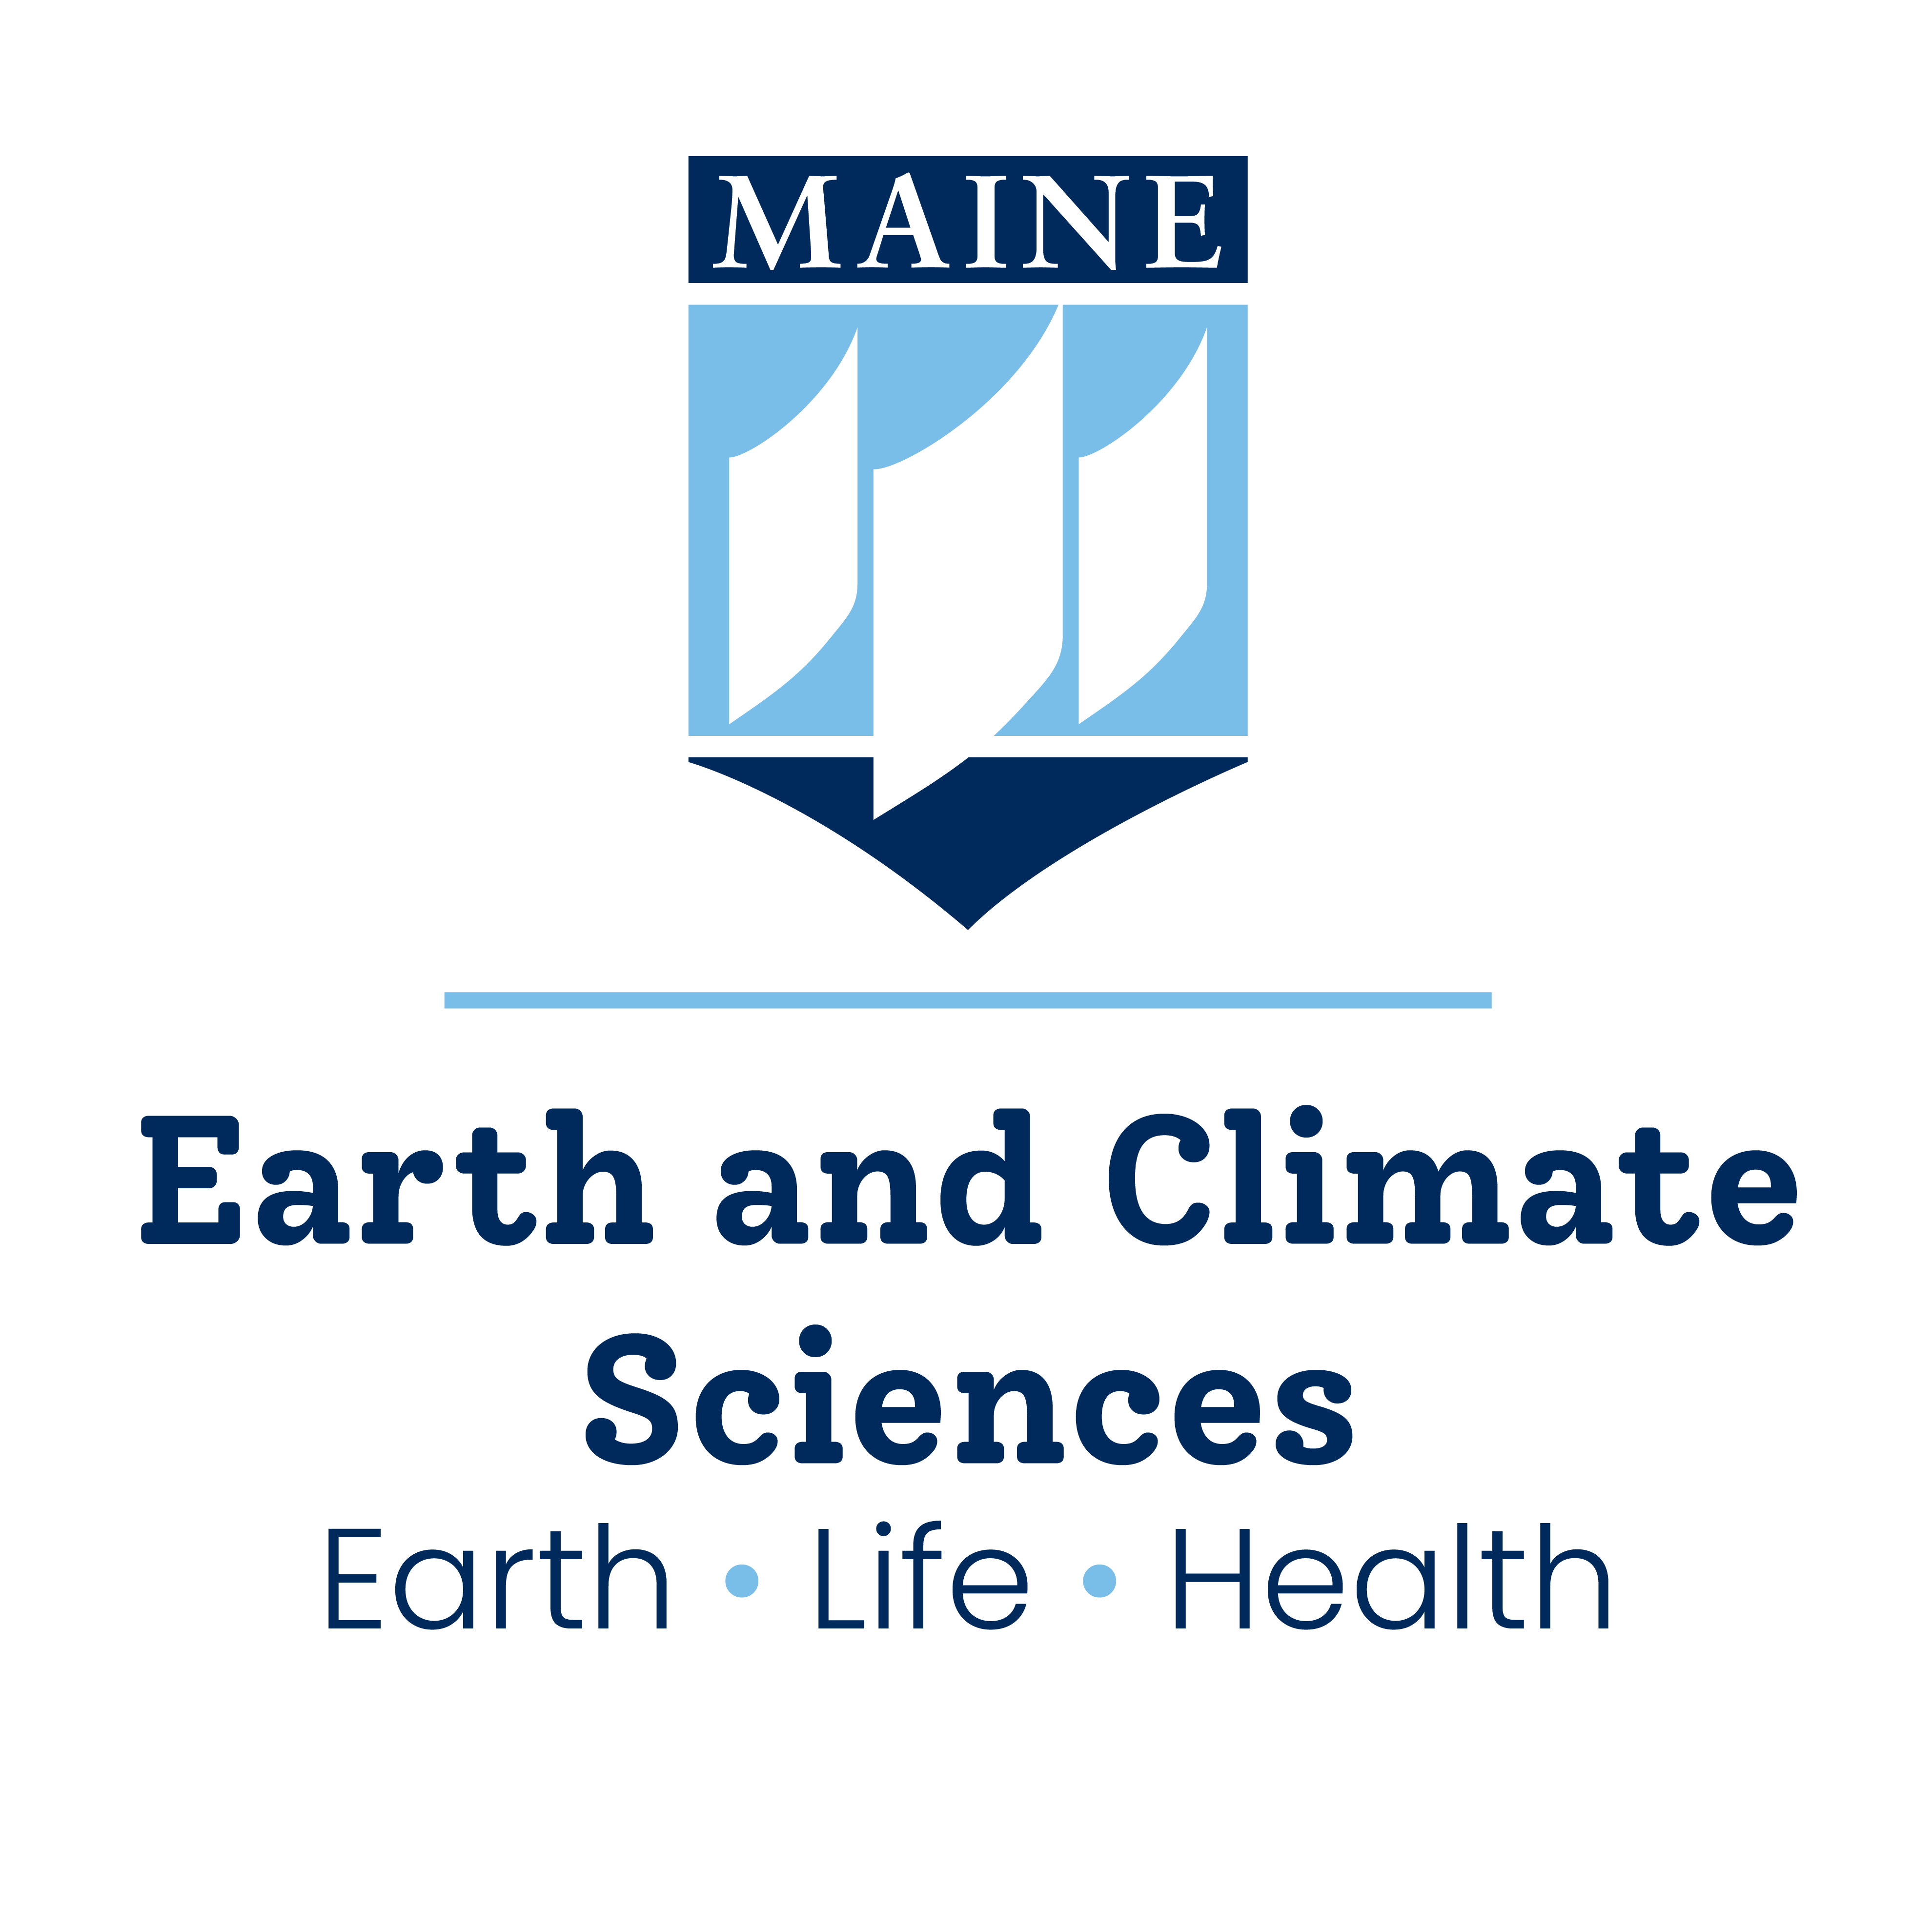 UMaine crest, earth and climate sciences, earth • life • health